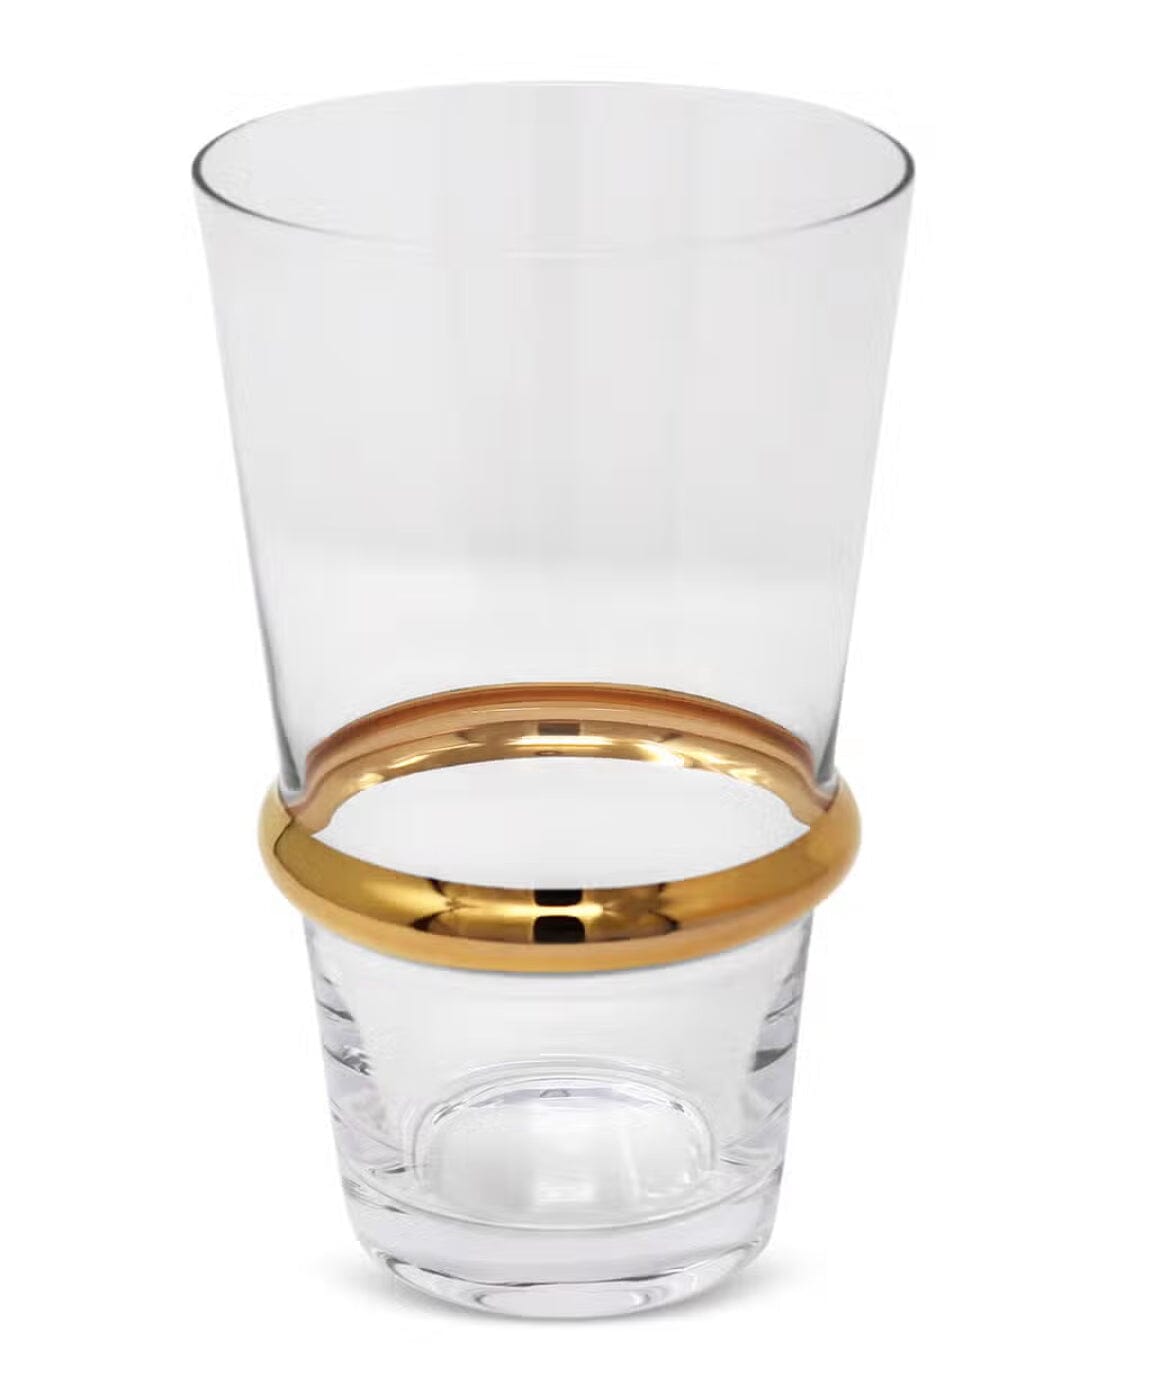 Set of 6 Glasses with Linear Design and Gold Stripe Flute Glasses High Class Touch - Home Decor Water Glasses 